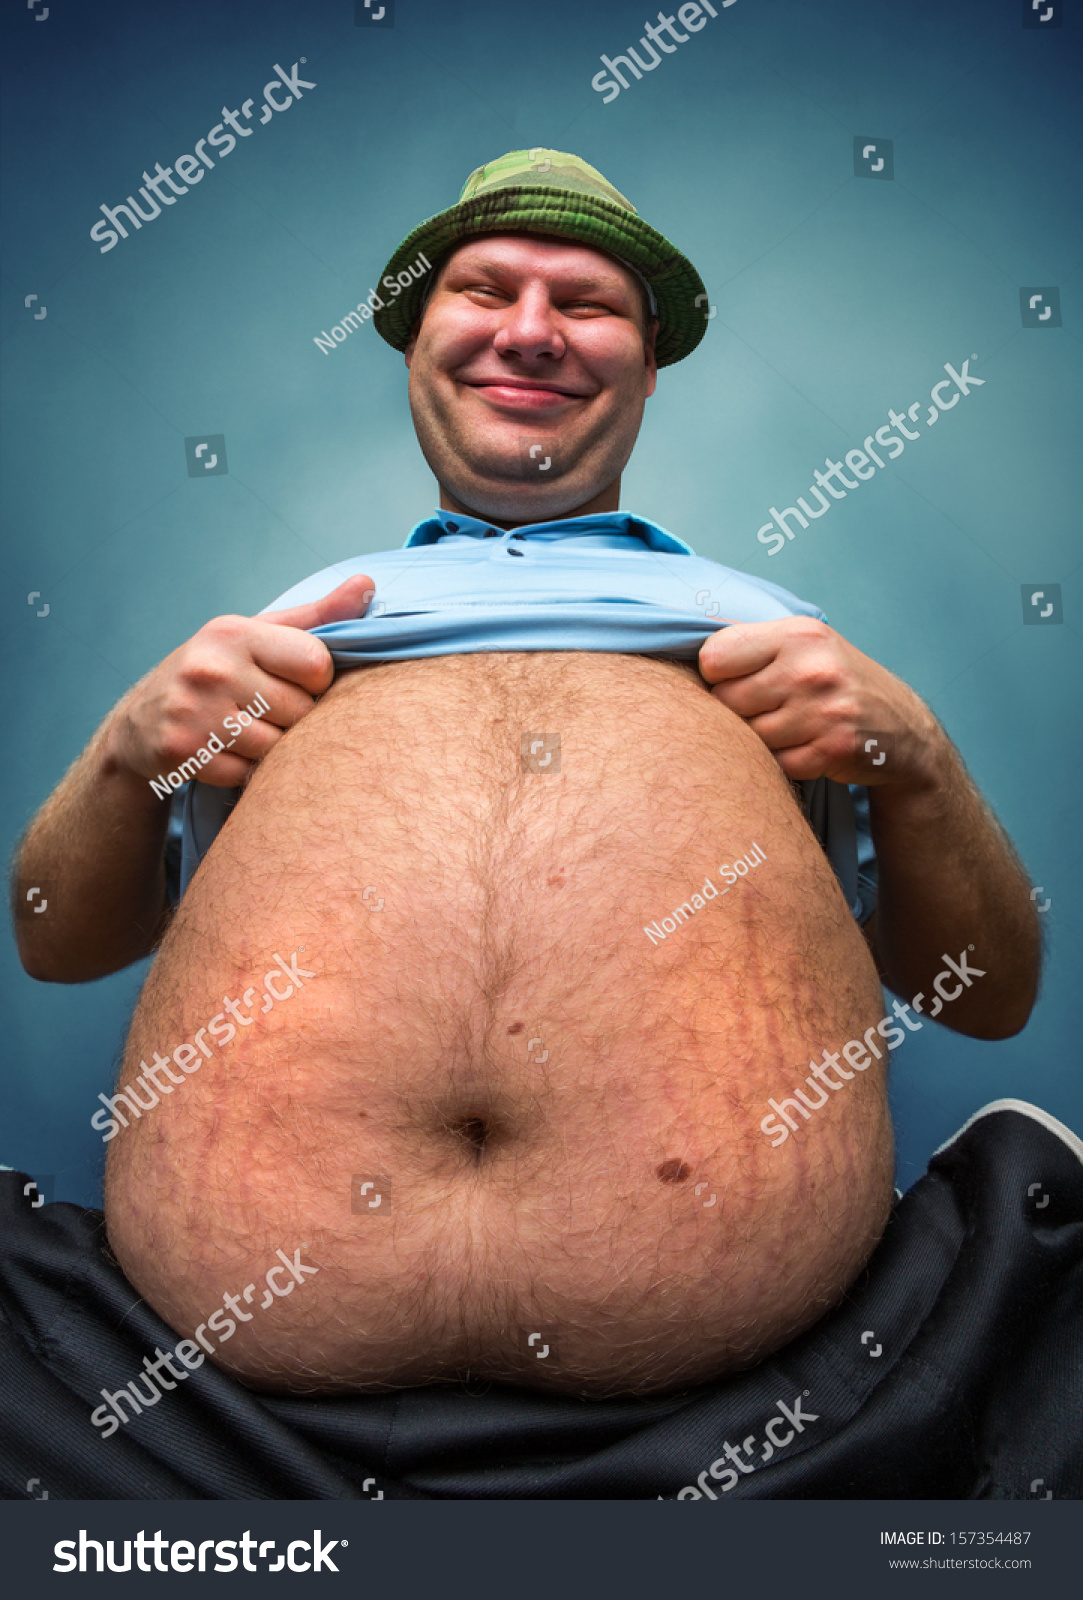 stock-photo-very-fat-man-demonstrate-his-big-belly-157354487.jpg